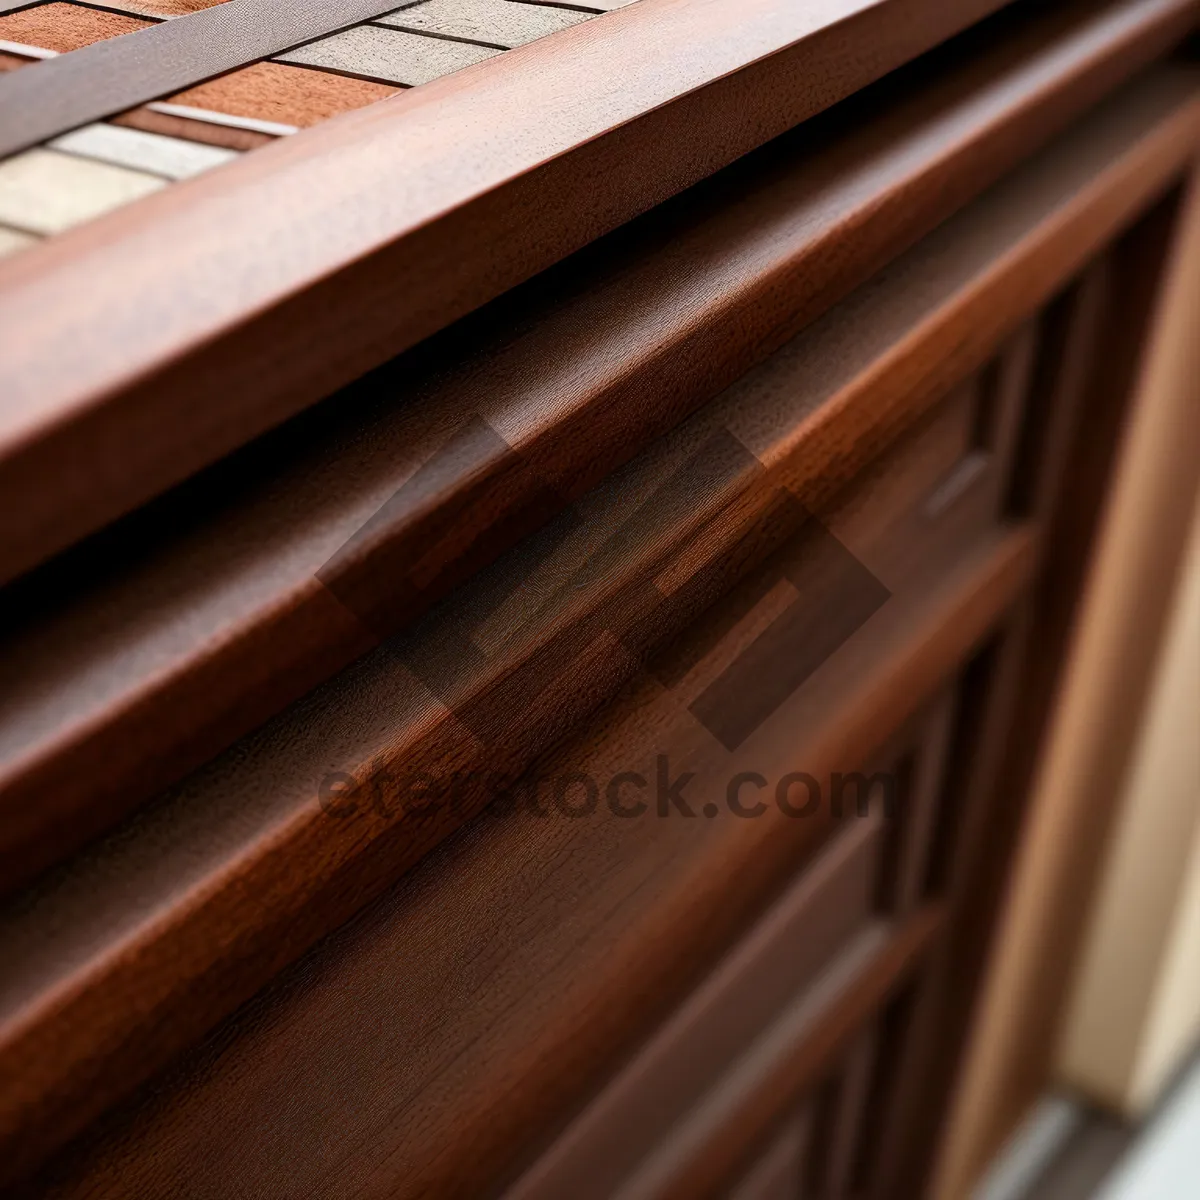 Picture of Vintage Piano Beam Texture with Musical Patterns